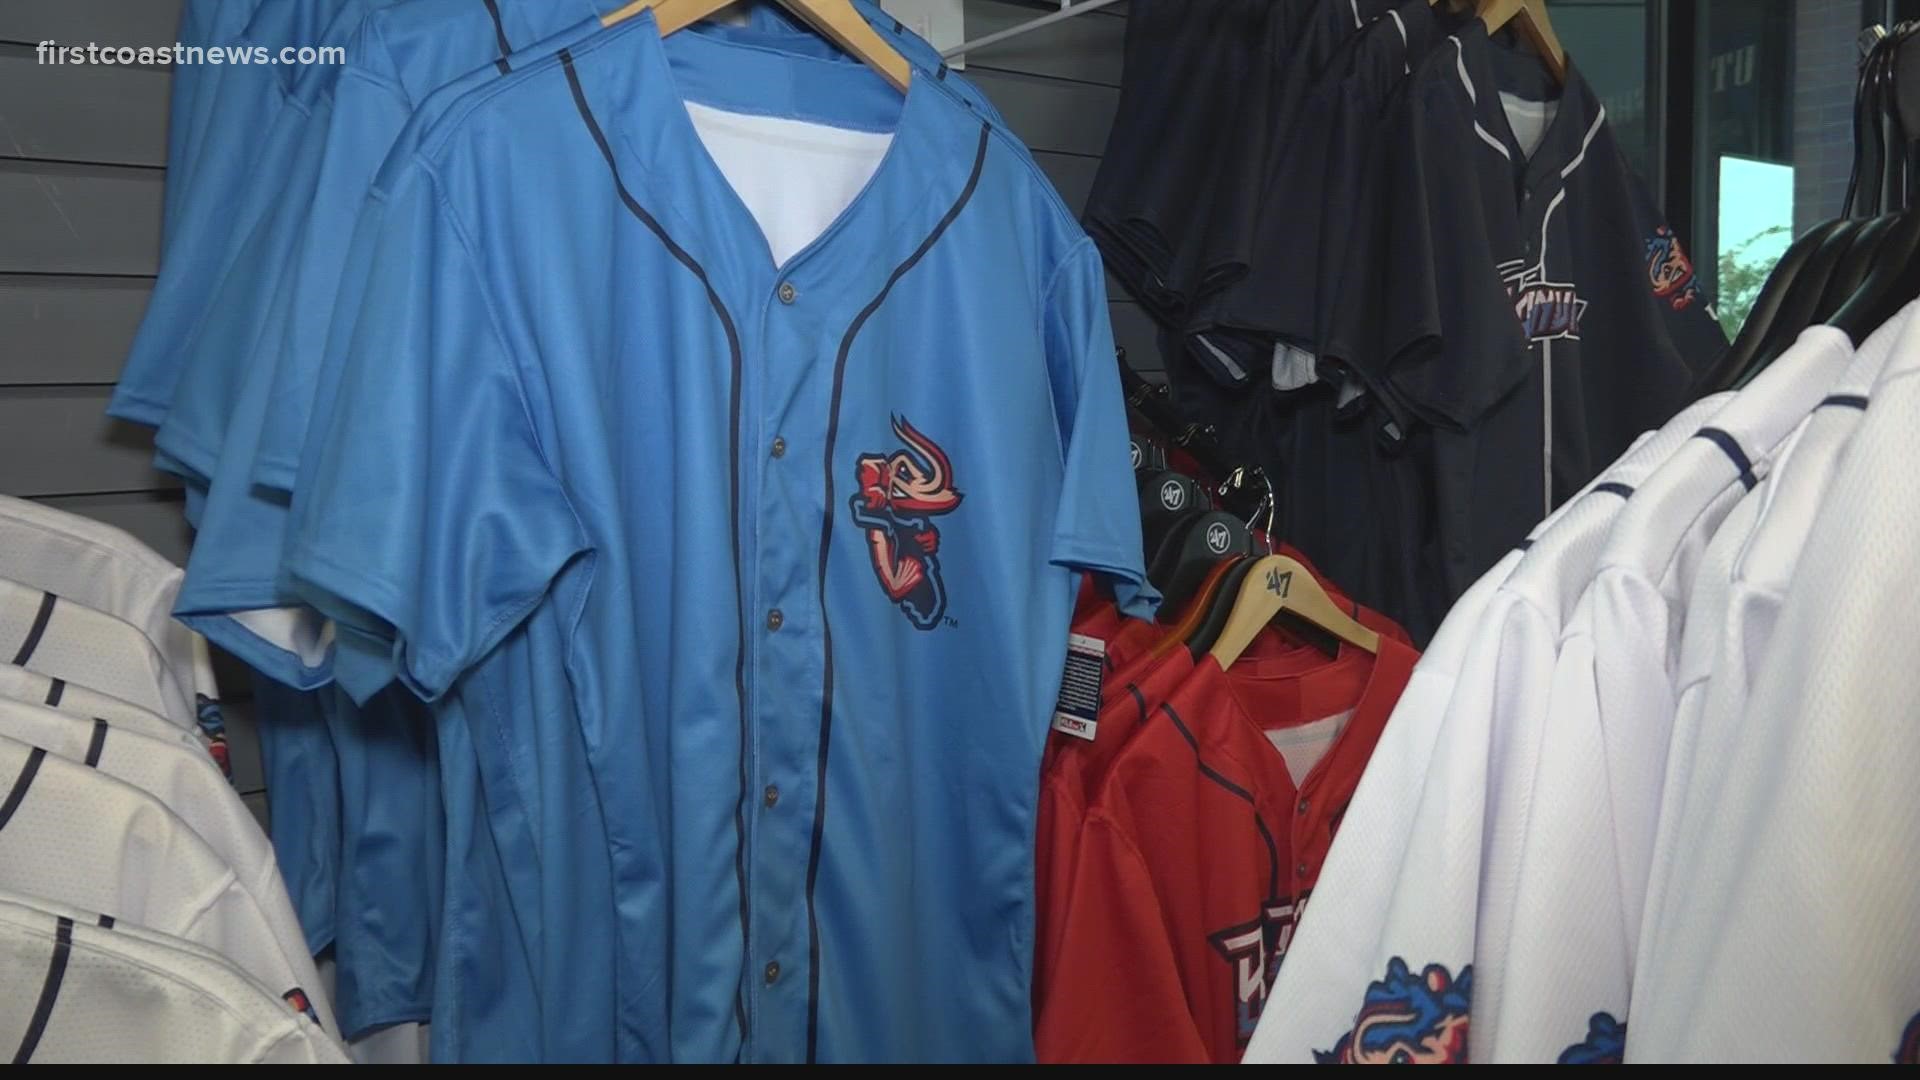 A big claim to fame for the Jumbo Shrimp is they're said to have the largest hat collection in Minor League Baseball.